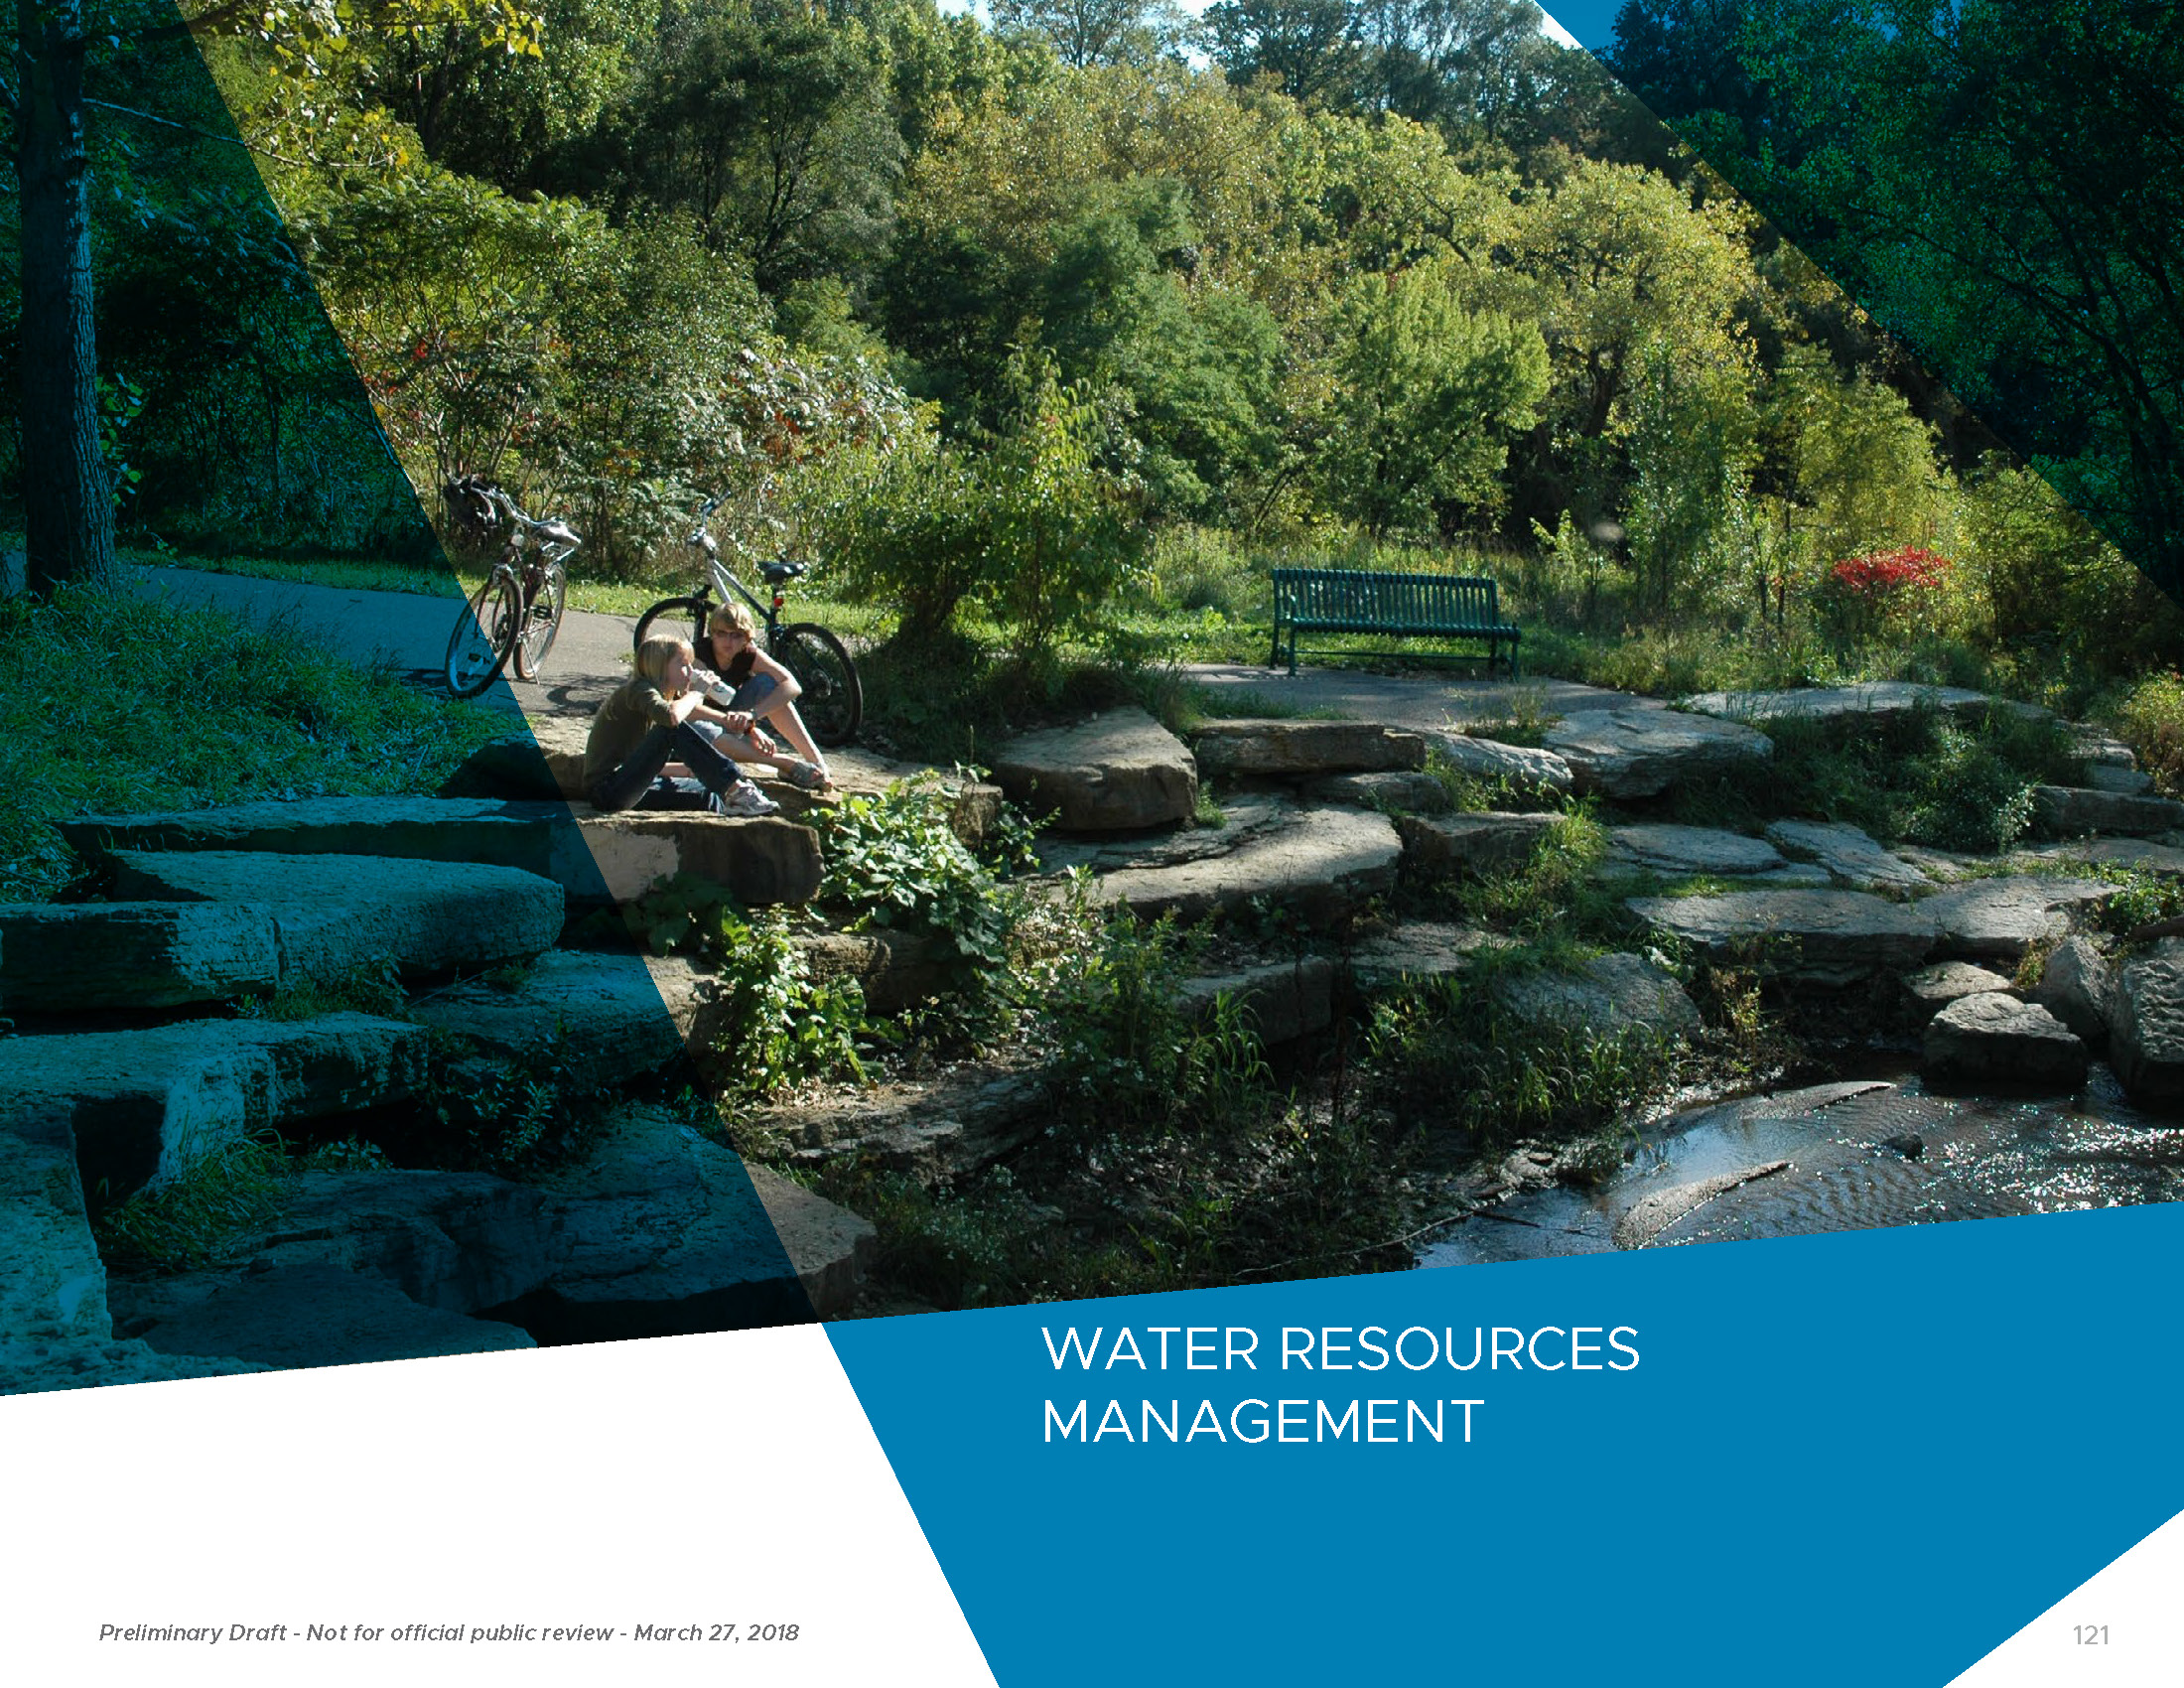 Water resources management chapter